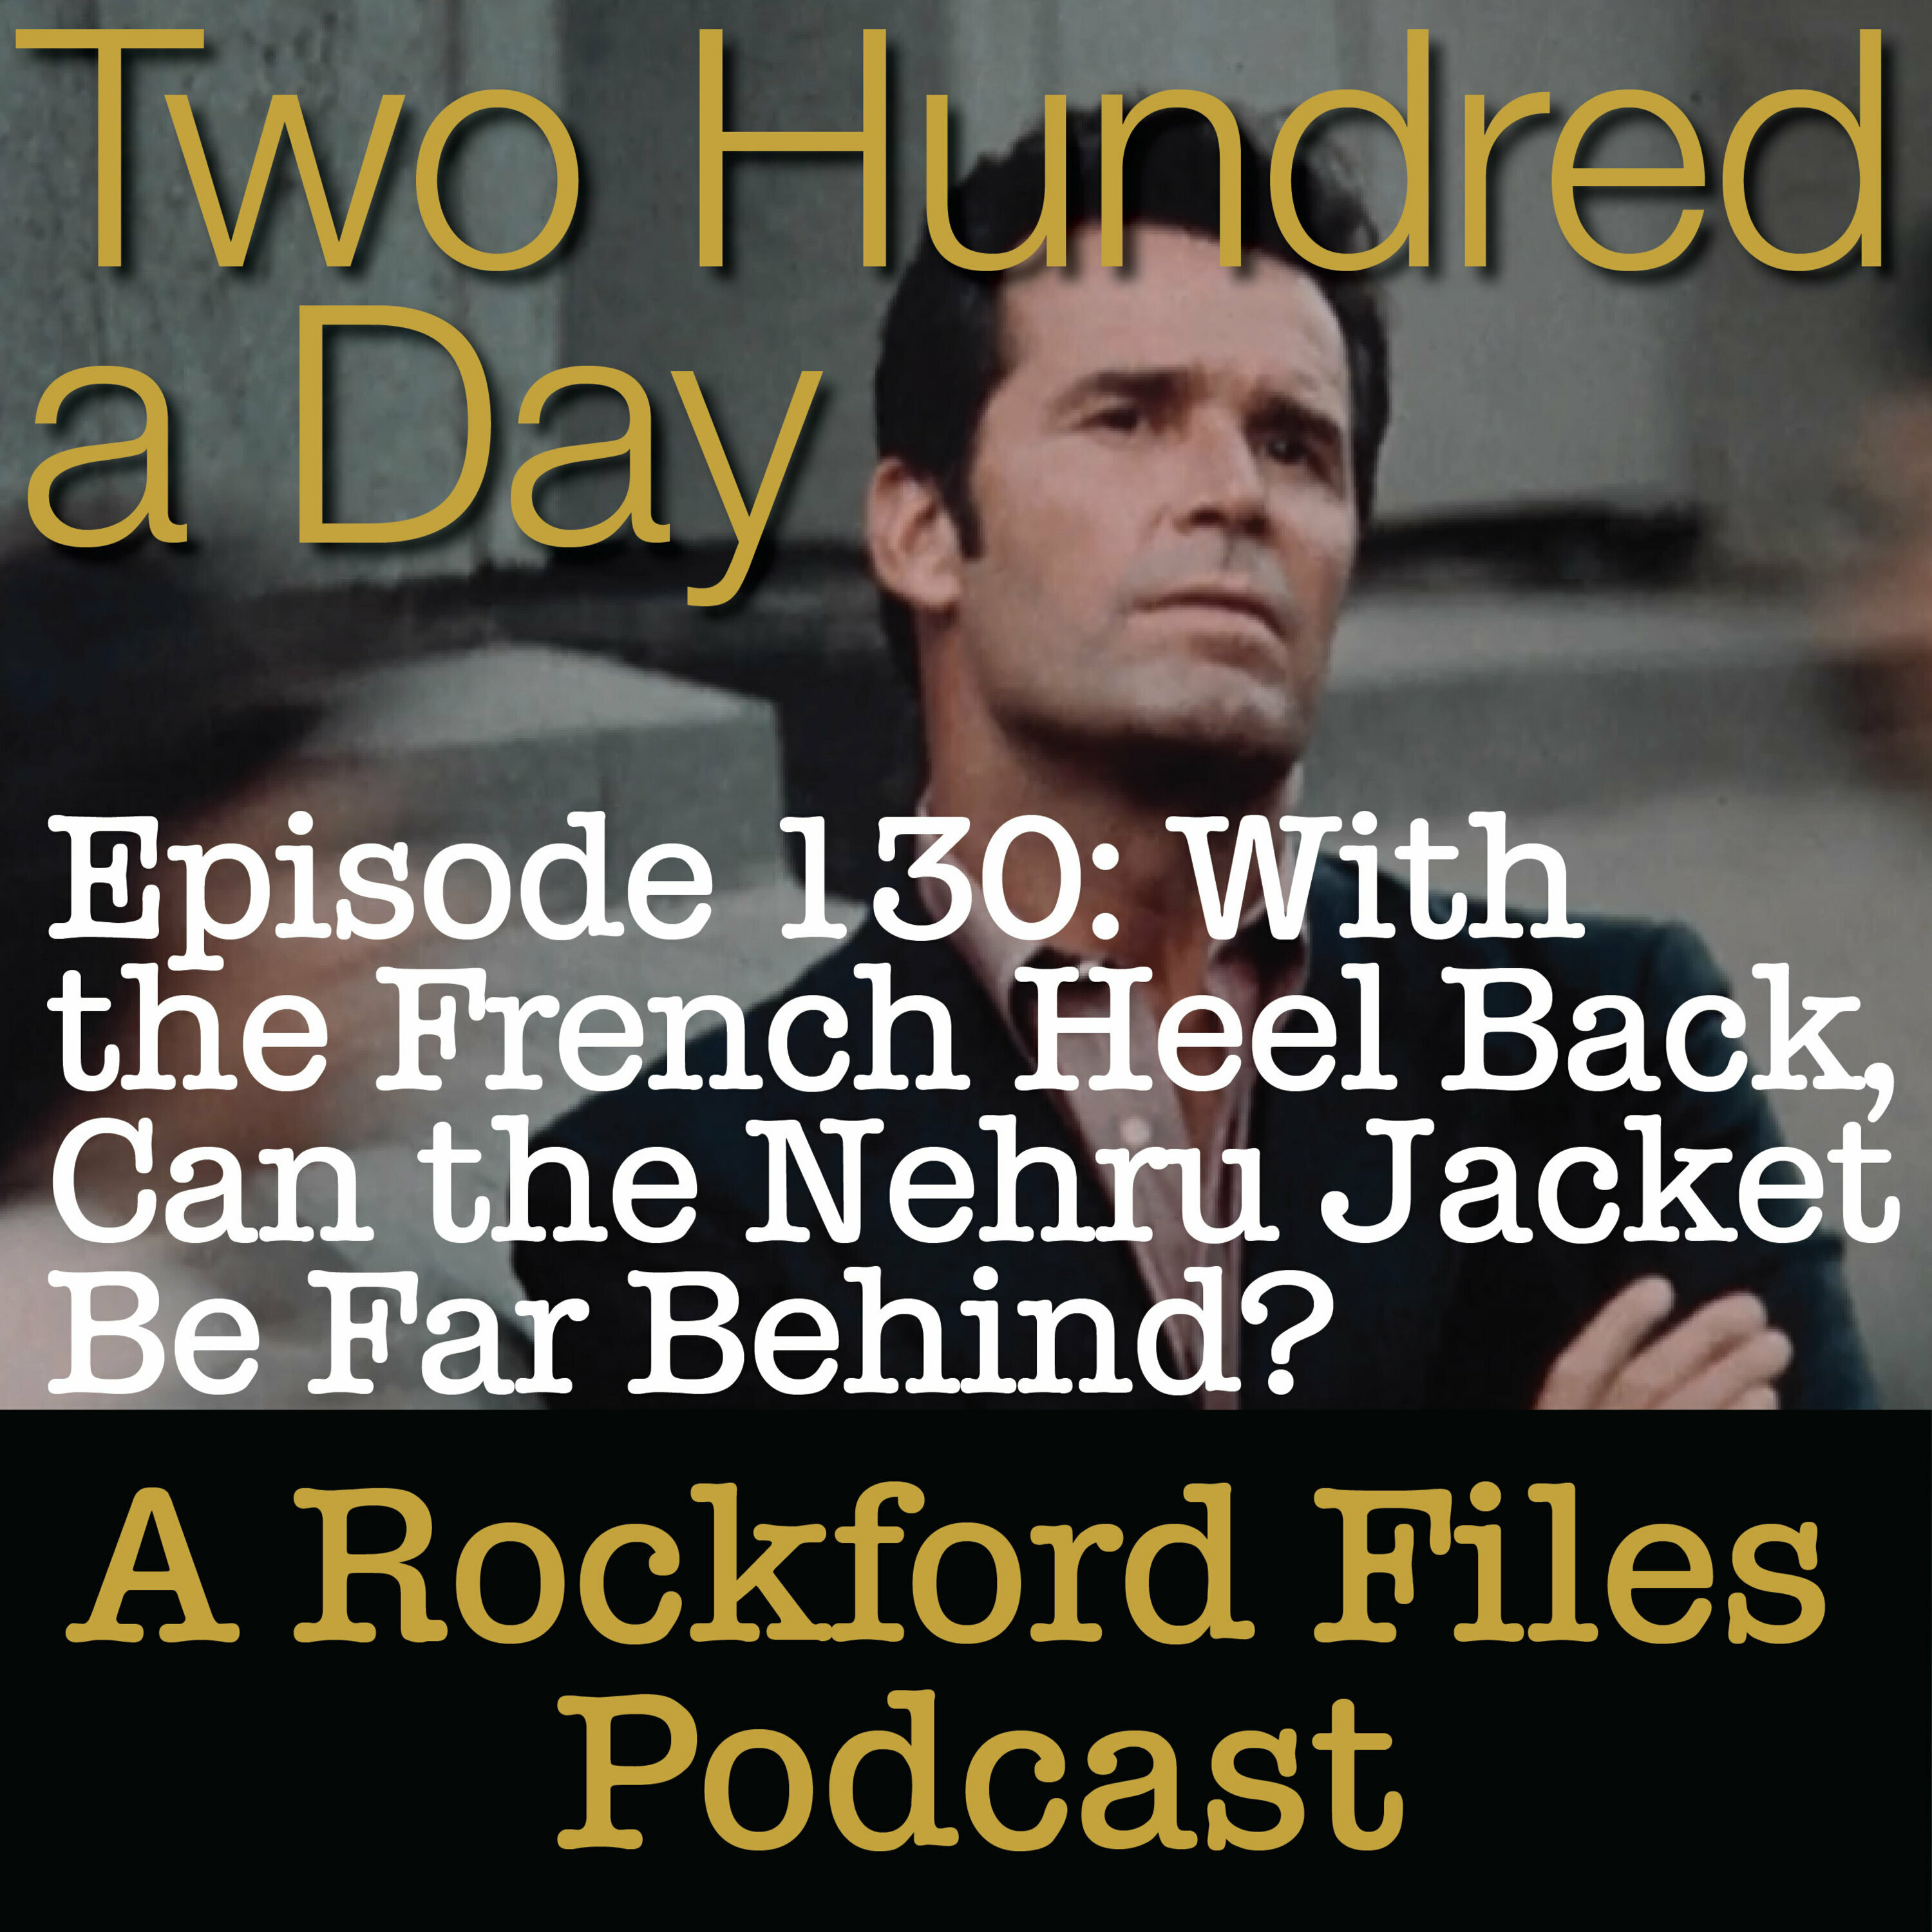 Episode 130: With the French Heel Back, Can the Nehru Jacket Be Far Behind?